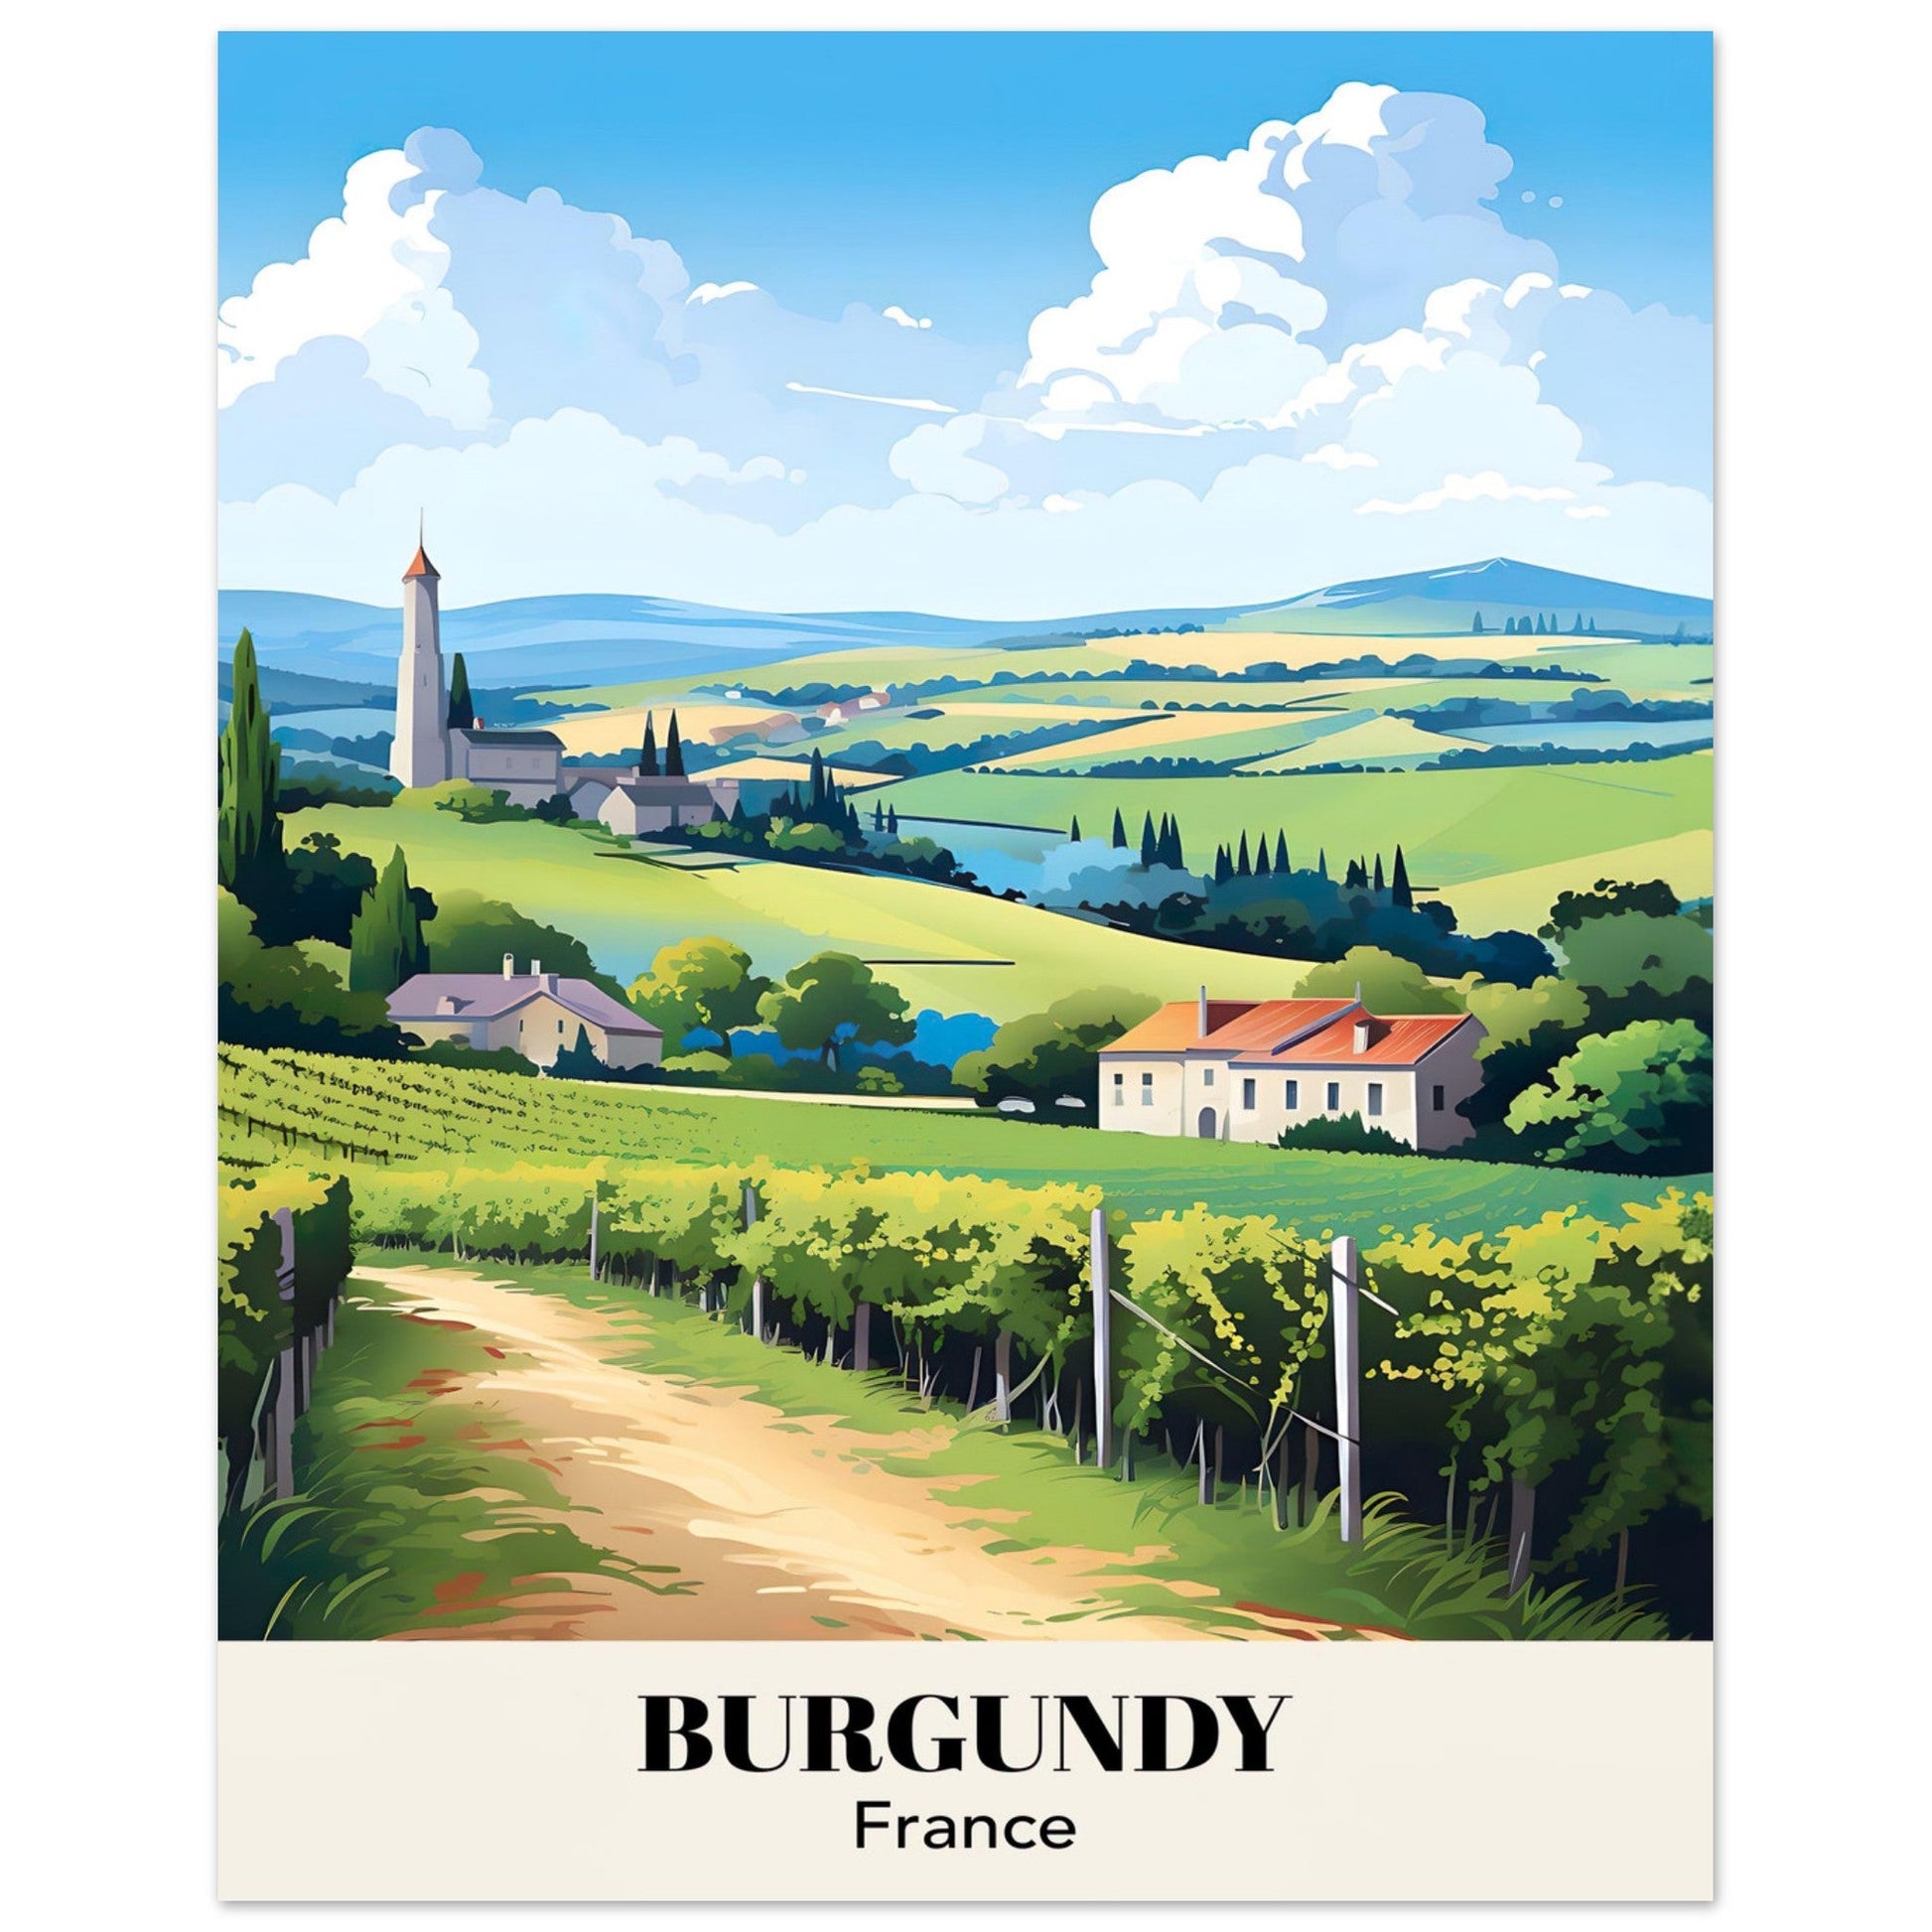 France | Burgundy Retro French County-side Travel Poster | Vintage Wall Art | Colorful Travel Print - Art Of Whim